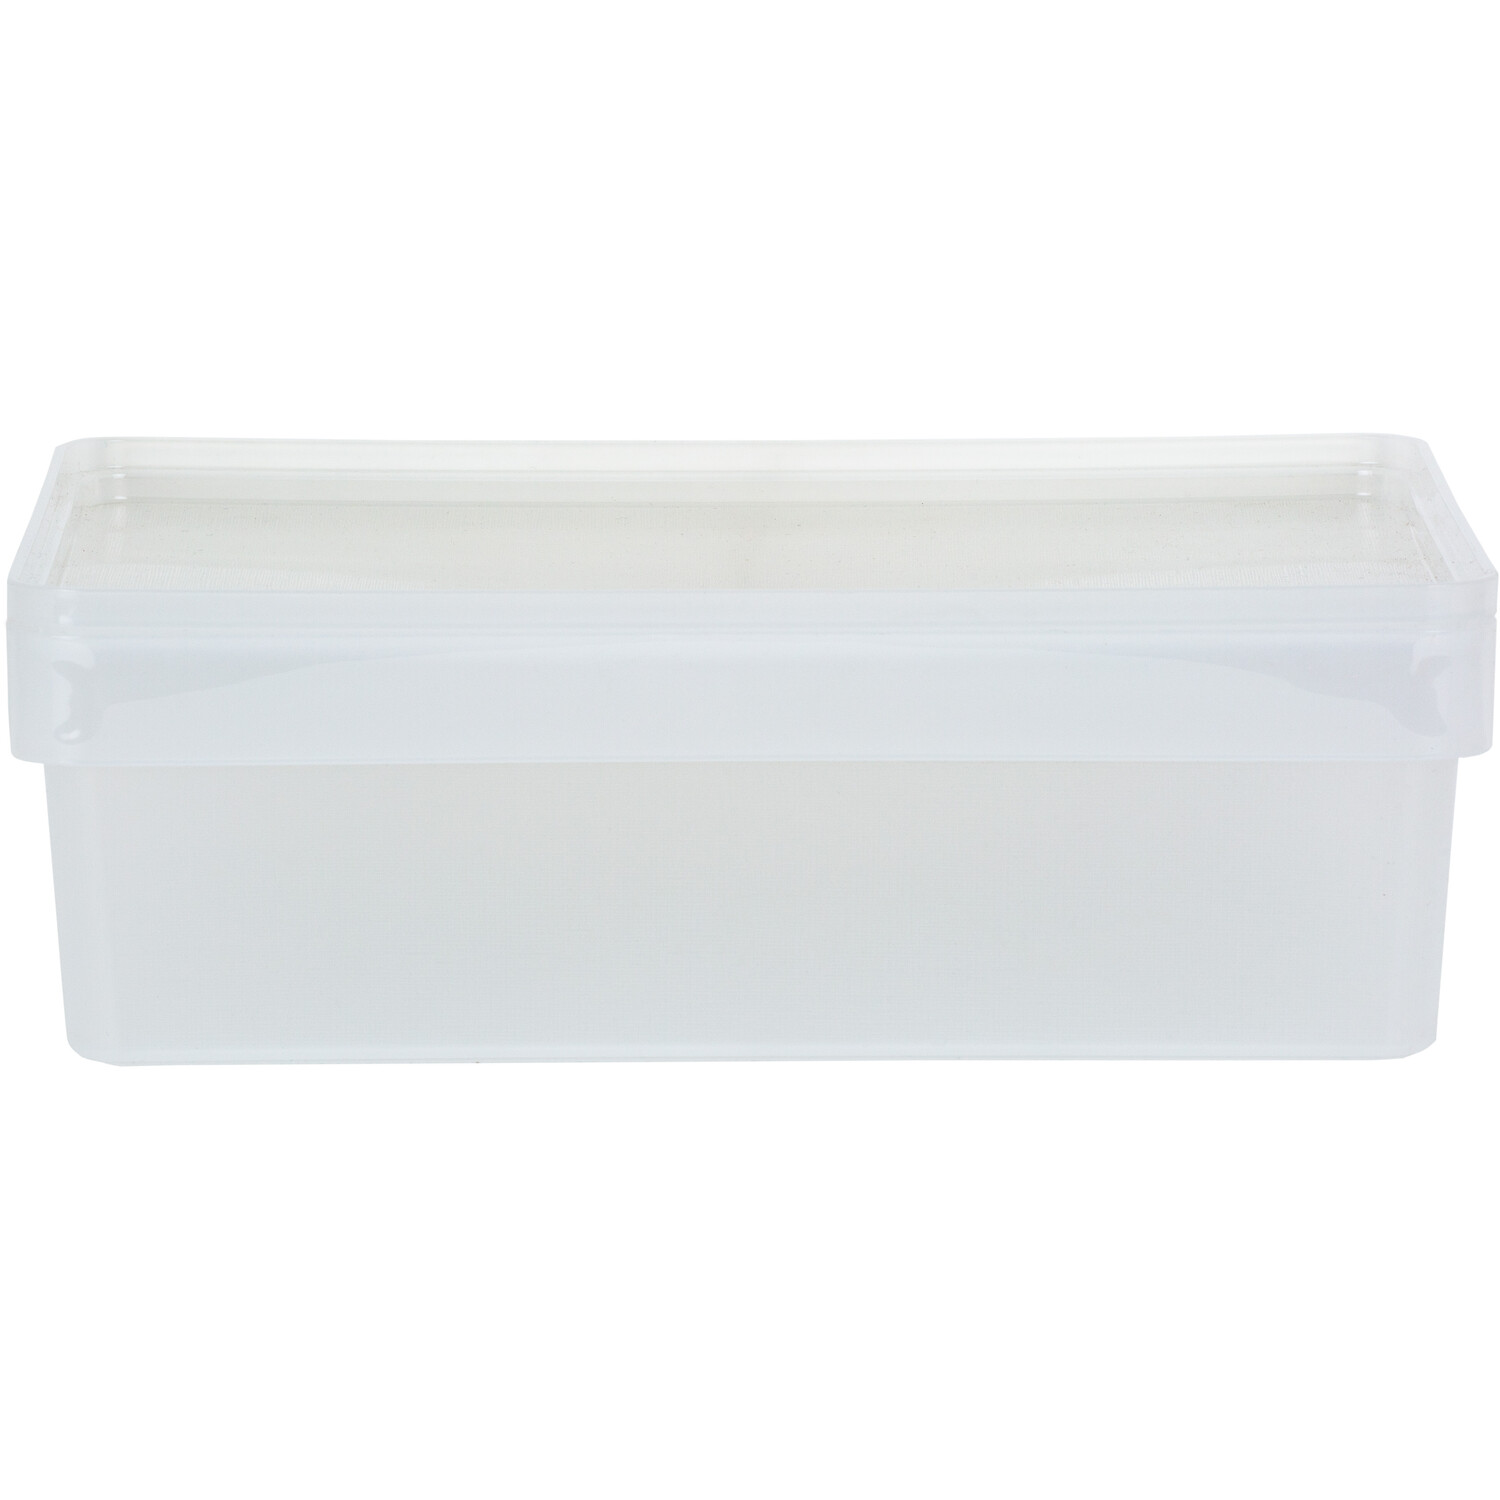 Studio Box and Lid  - Clear / 11cm Image 1